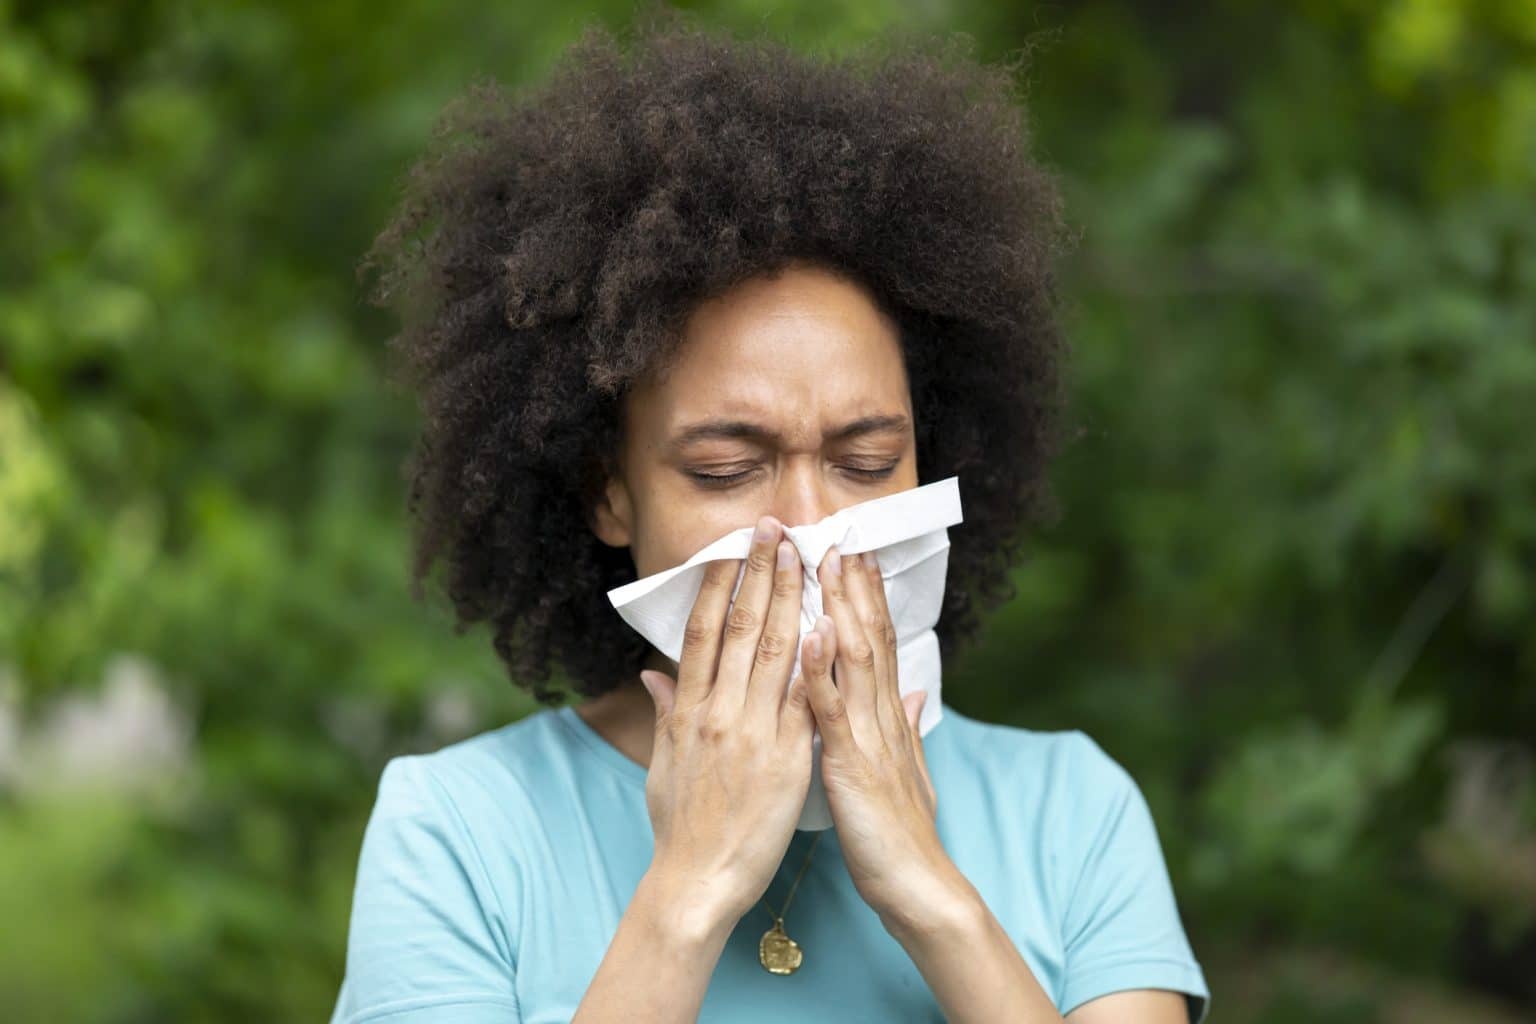 A woman with Sinusitis Problems is Feeling Displeased and Blowing Nose in Napkin During a Walk in City Park During a Summer Day.